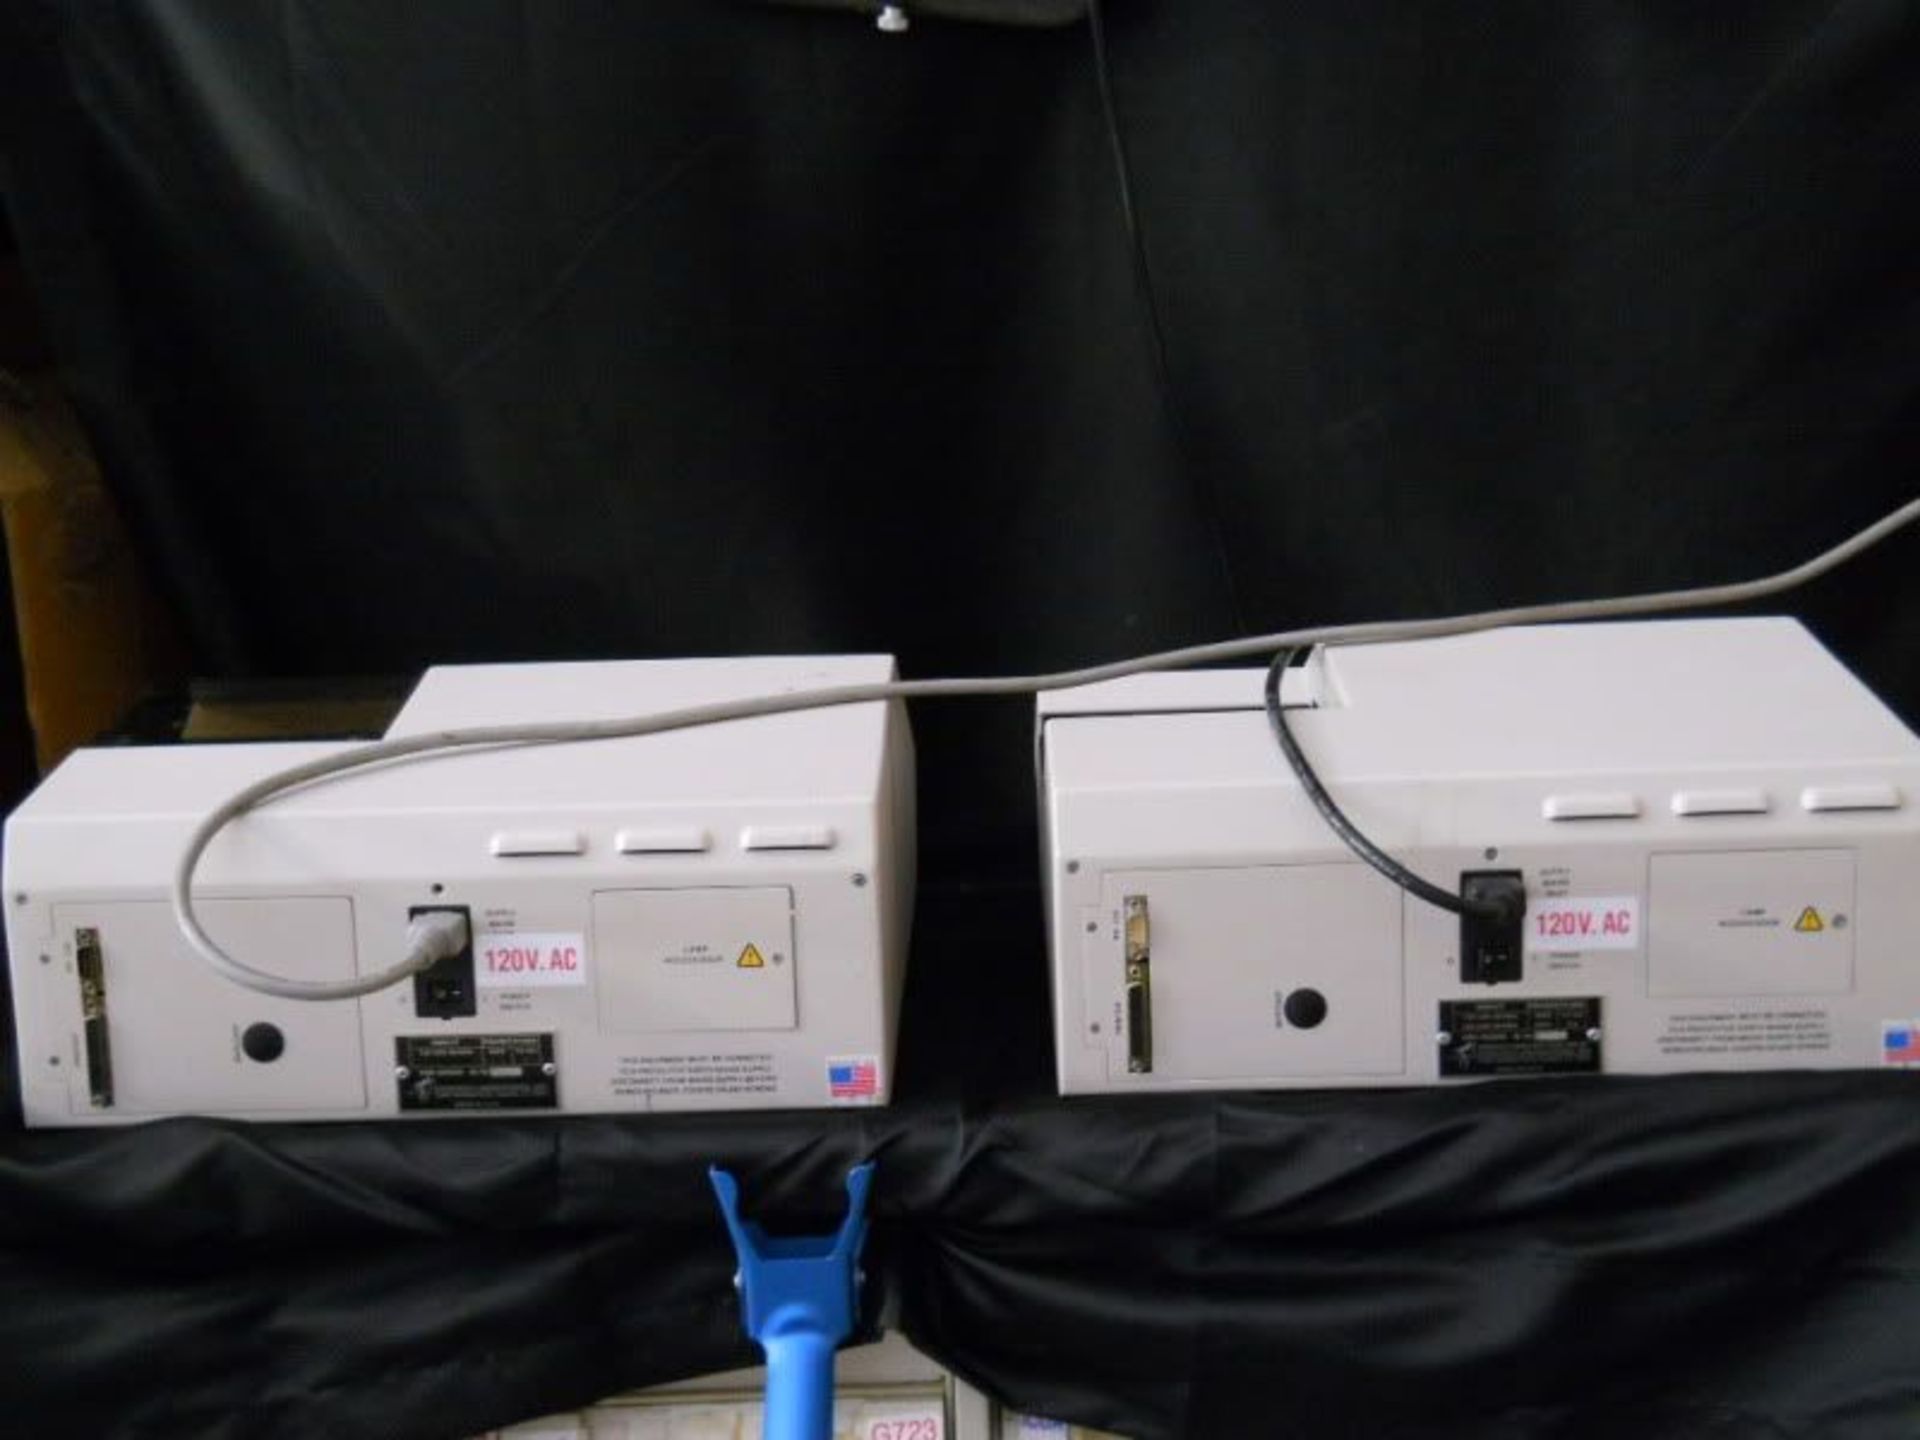 Lot of 2 Dynatech MR5000 Microplate Readers (Parts Not Working), Qty 1, 221094217837 - Image 9 of 12